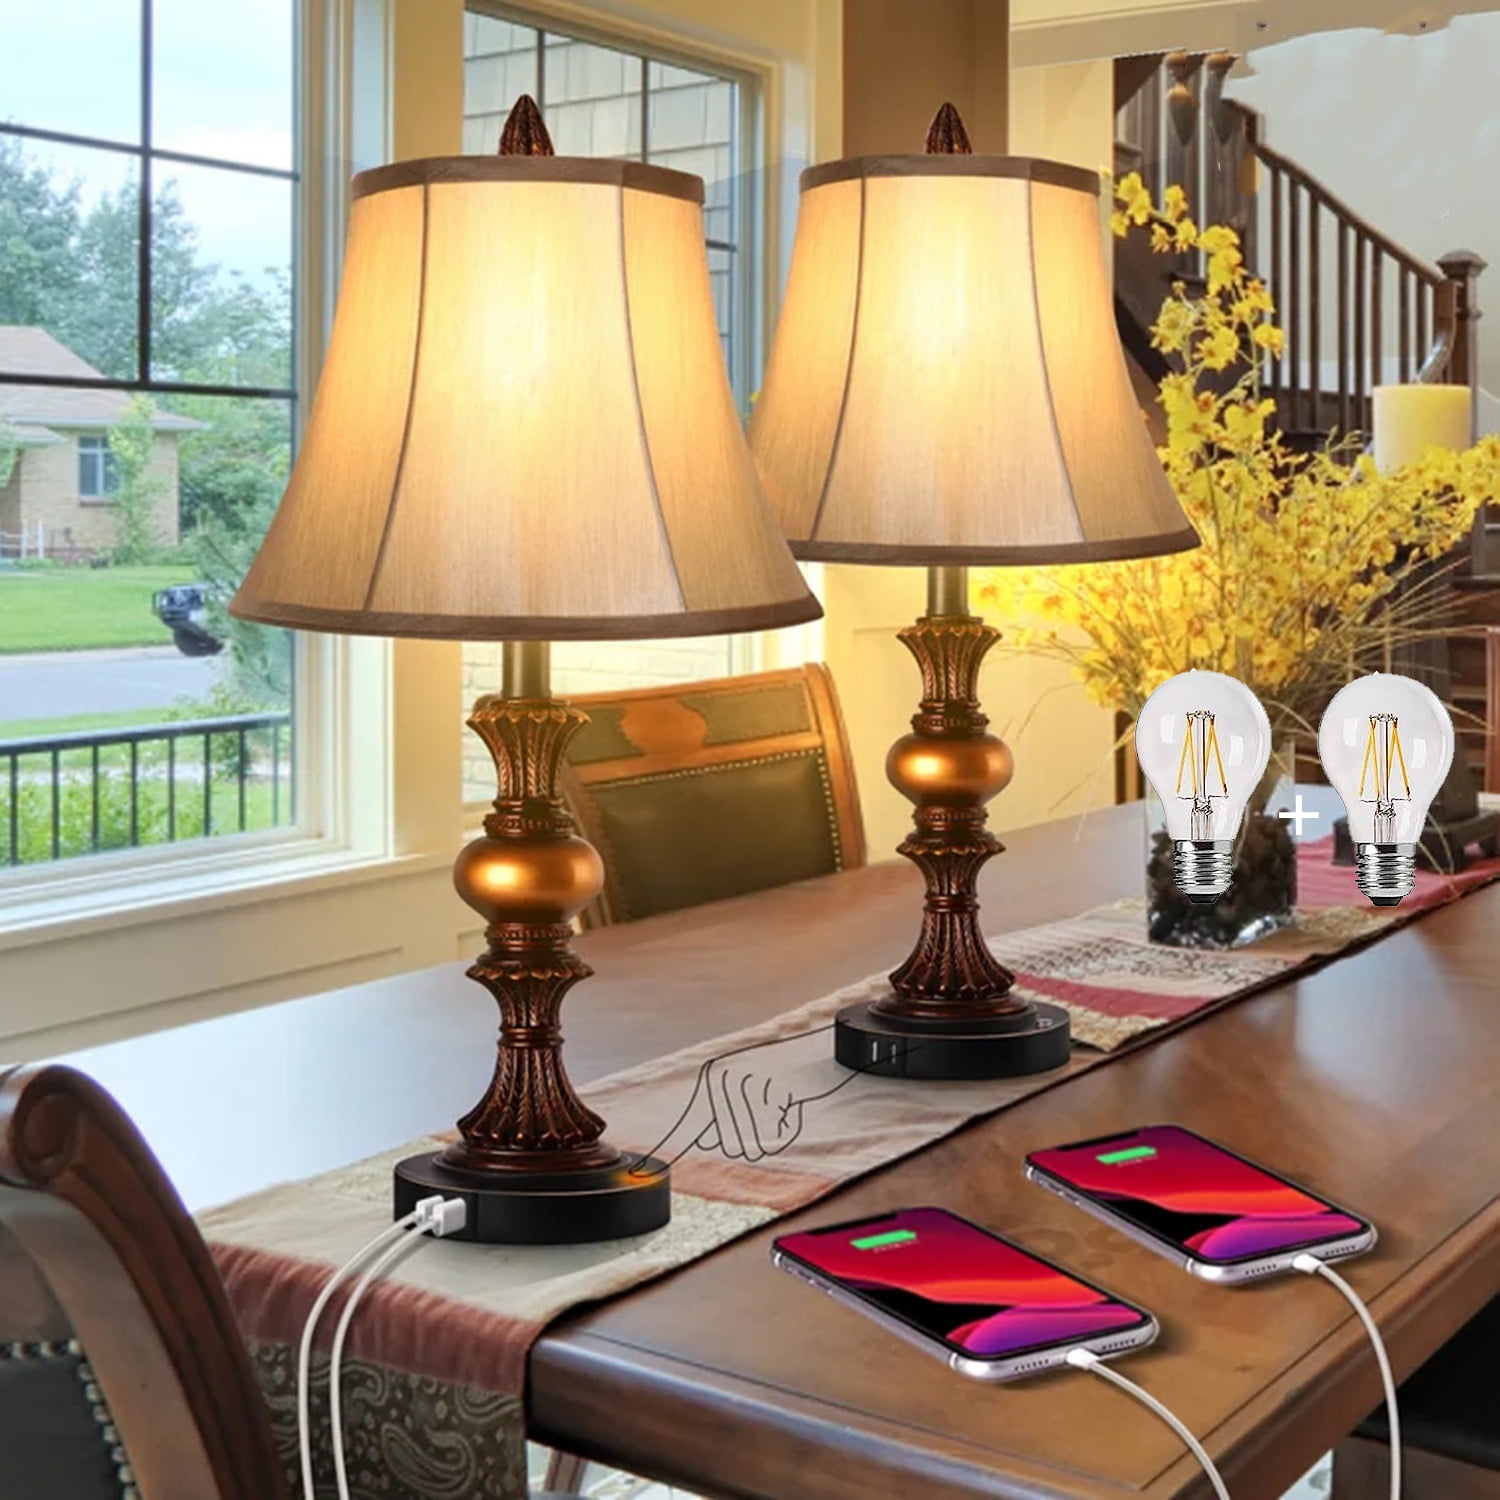 nictiv 2 pack traditional table lamps,touch control 3-way dimmable